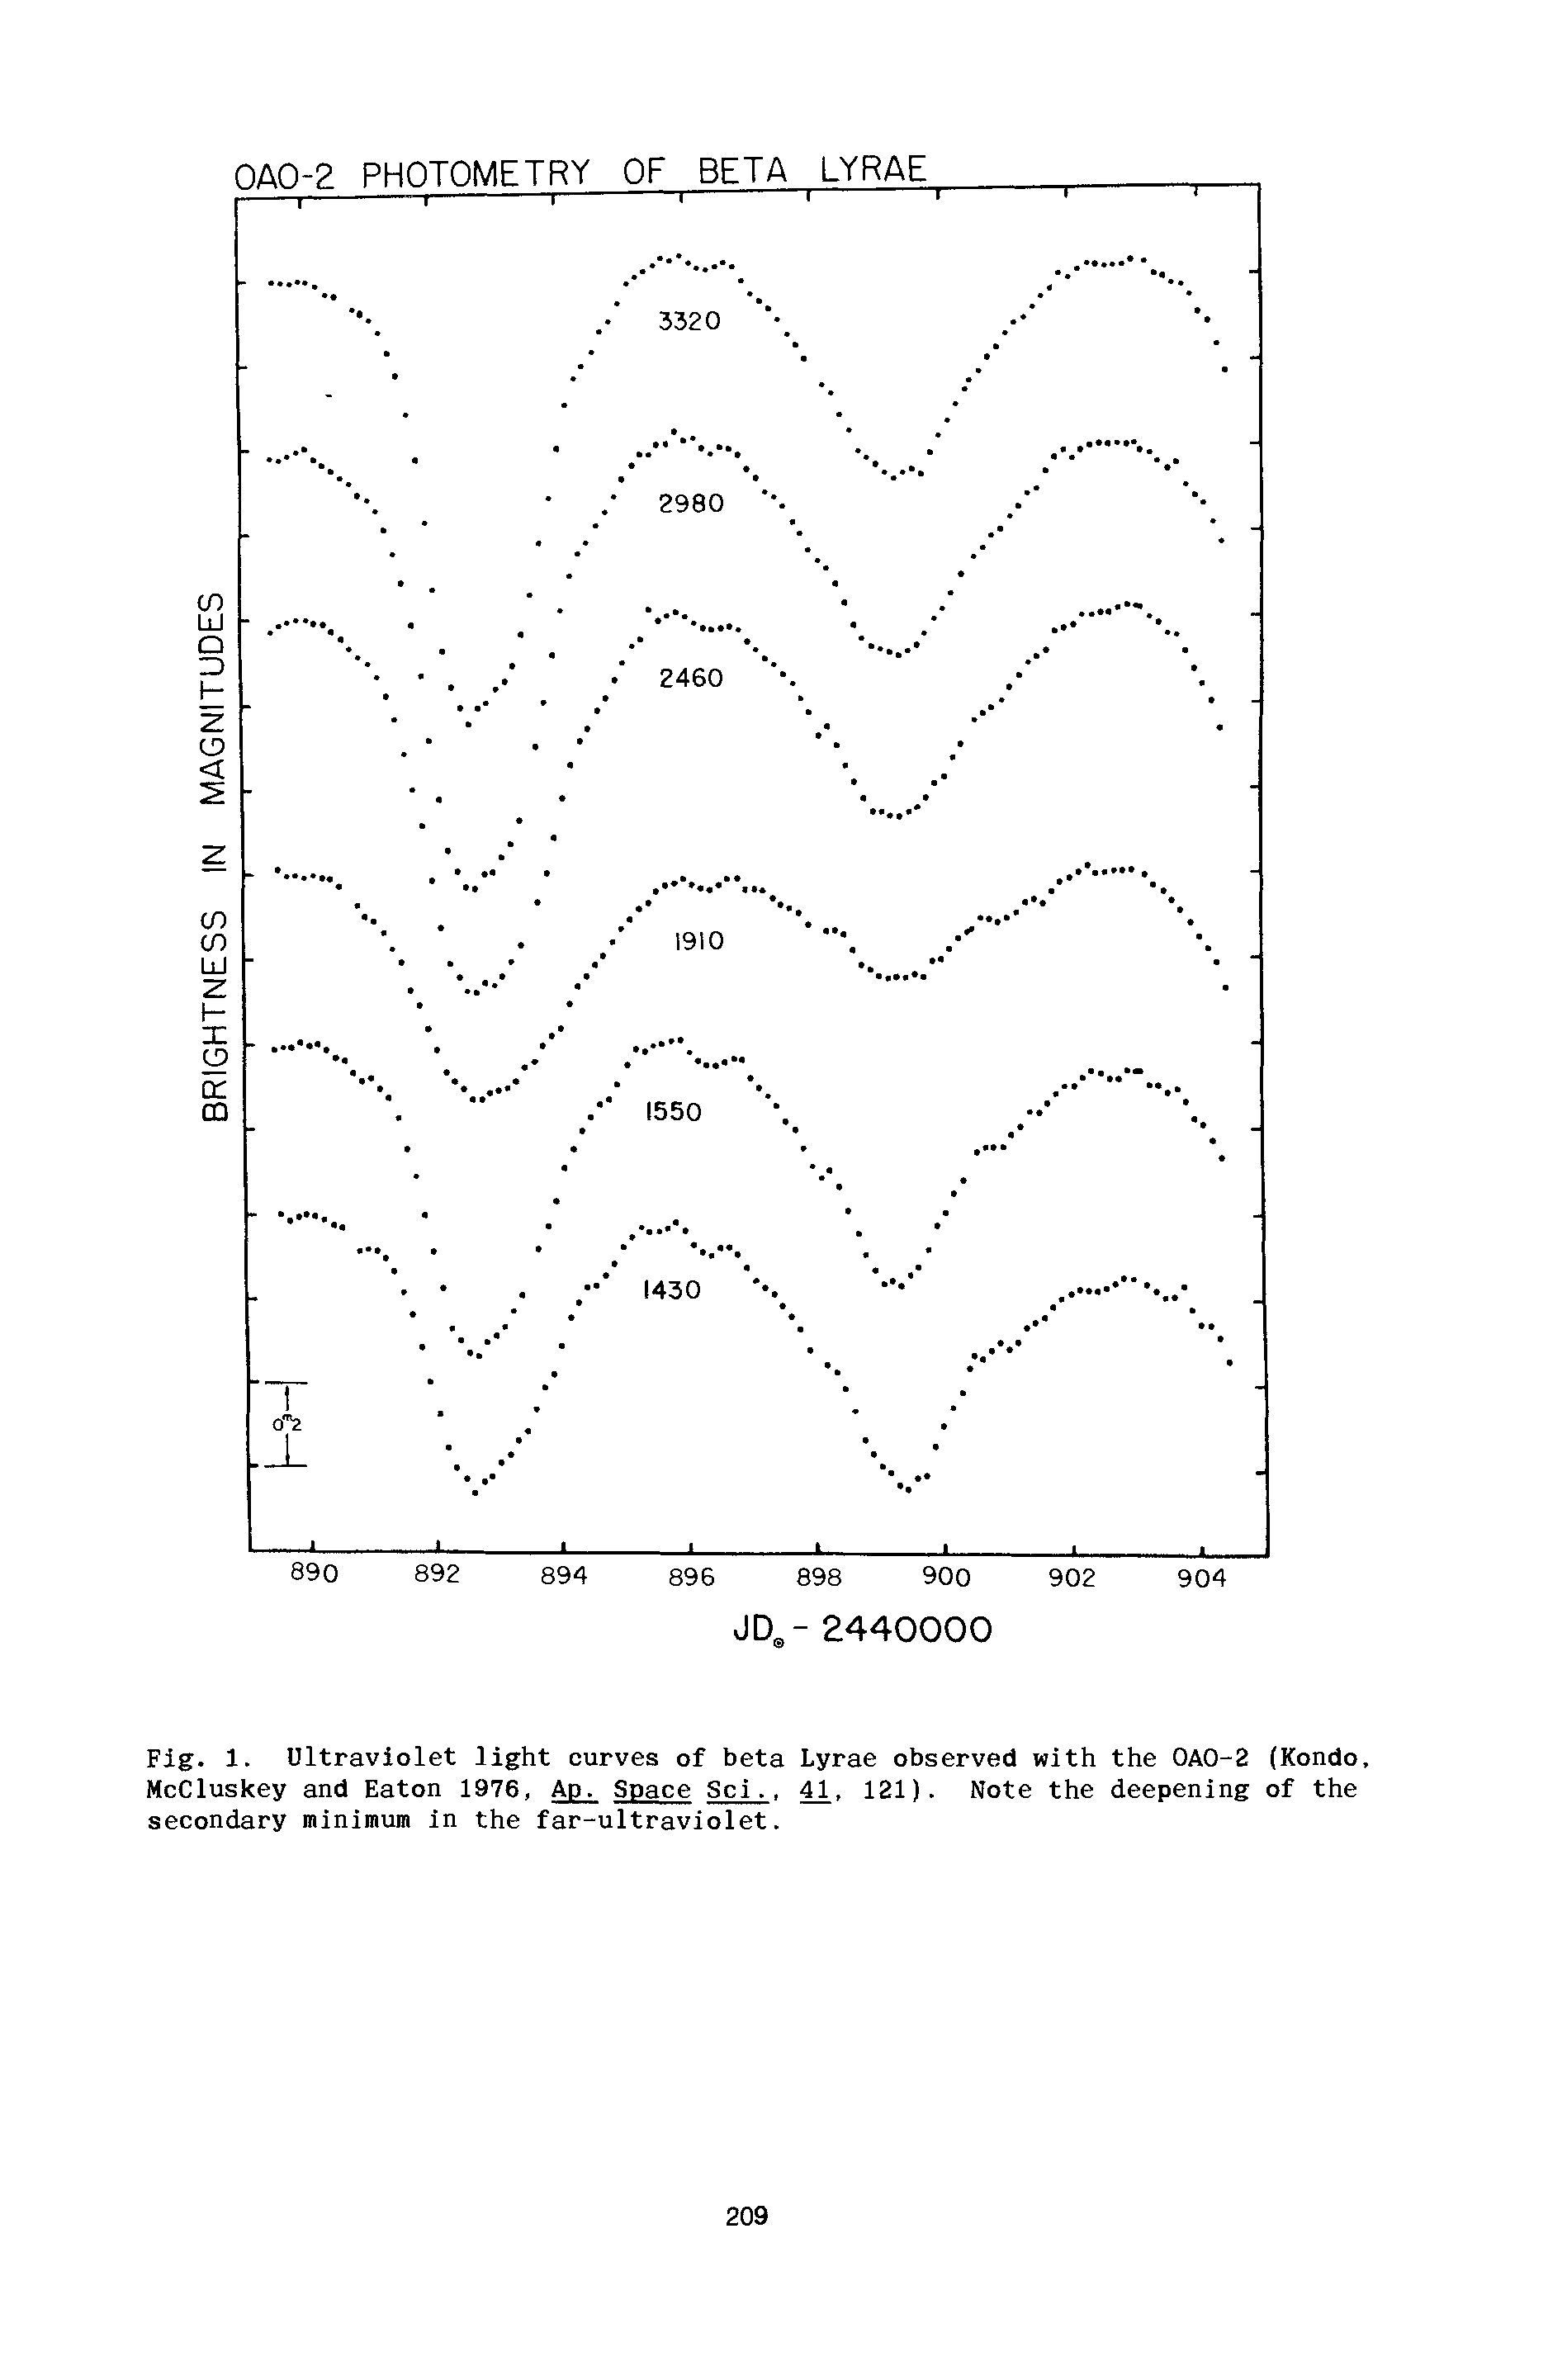 Fig. 1. Ultraviolet light curves of beta Lyrae observed with the 0A0-2 (Kondo, McCluskey and Eaton 1976, An. Space Sci. , 41. 121). Note the deepening of the secondary minimum in the far-ultraviolet.